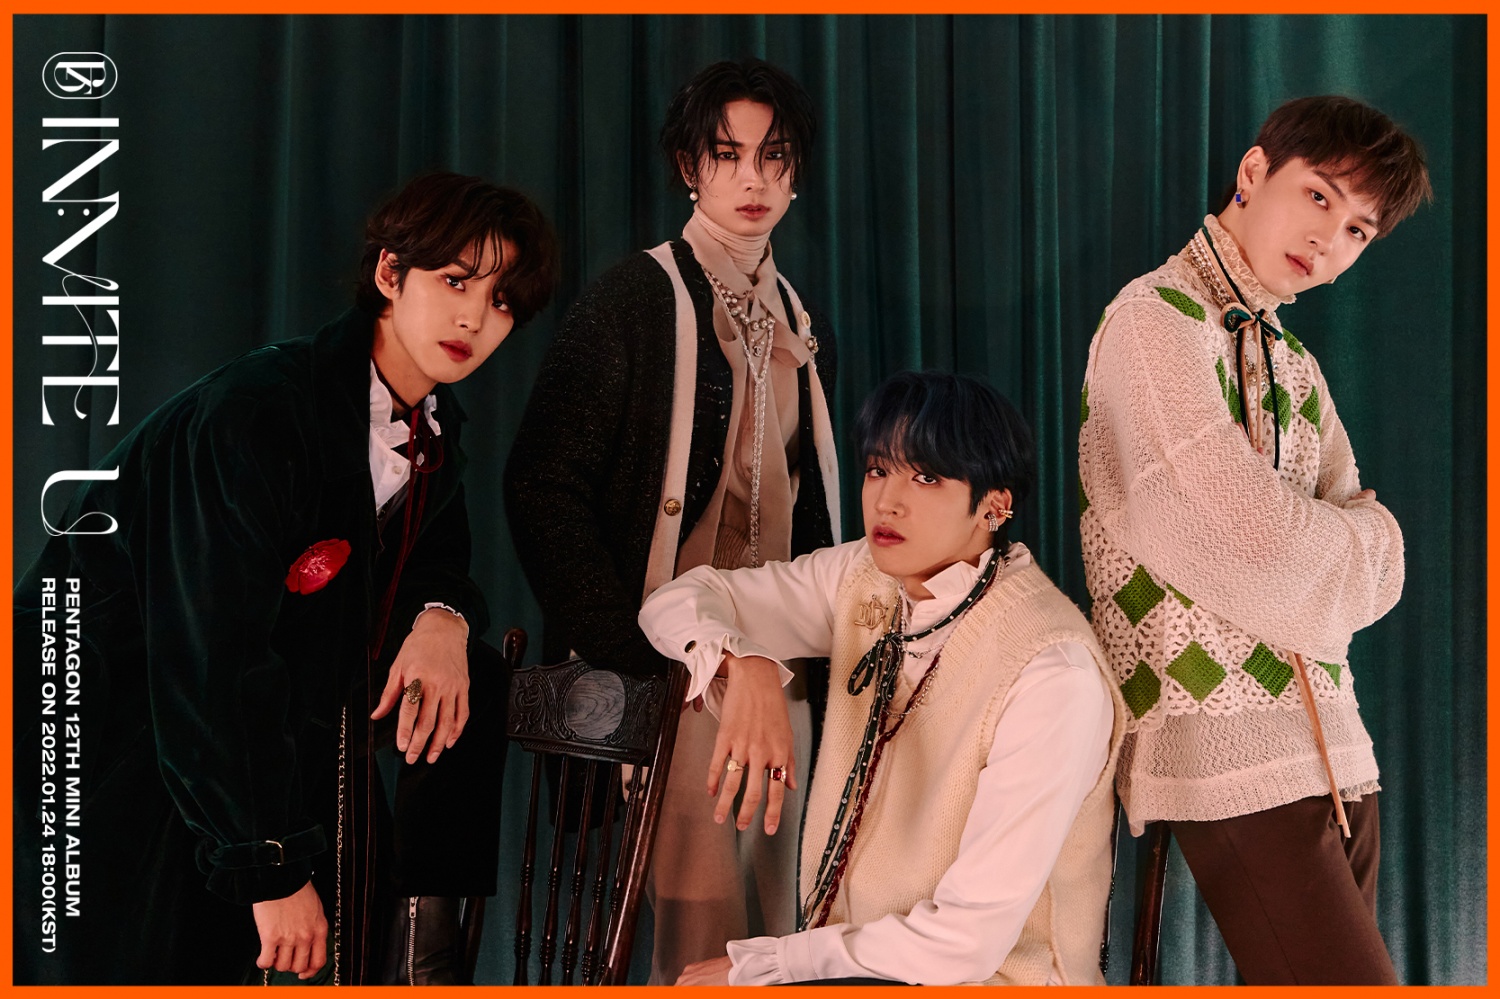 Pentagon reveals the second concept image for 'IN:VITE U'... fatal visual